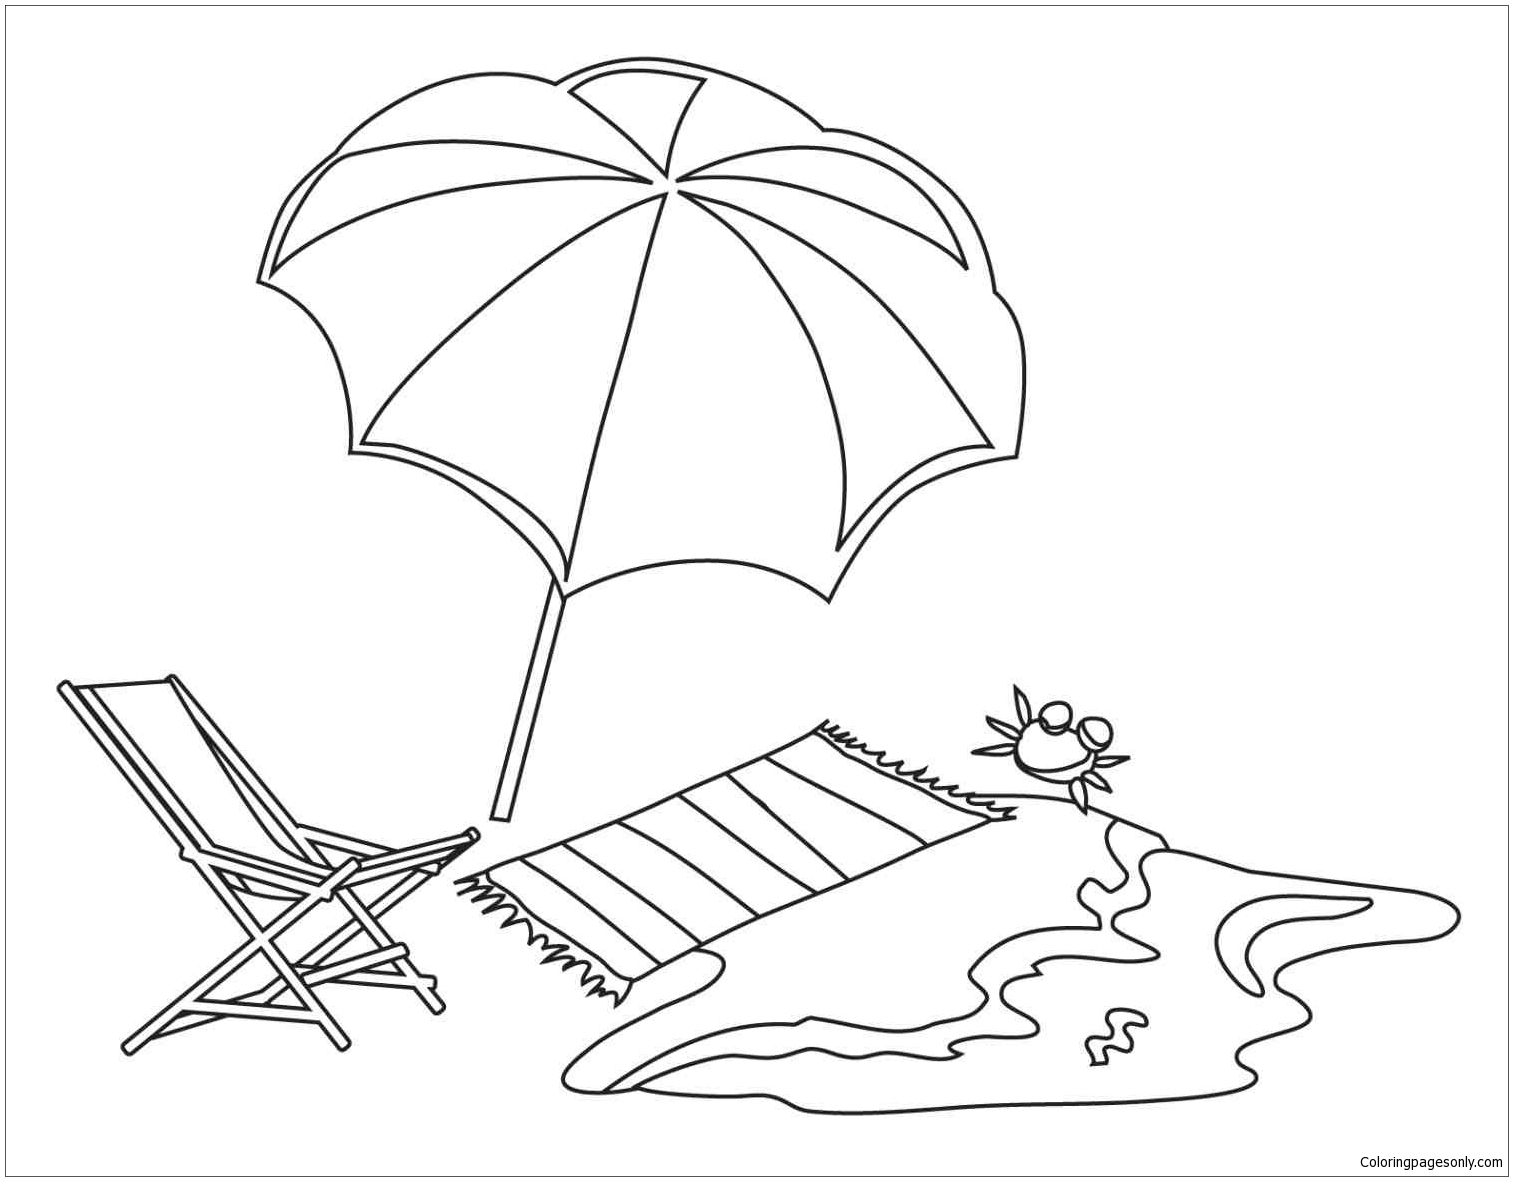 Beach Theme 1 Coloring Page - Free Printable Coloring Pages